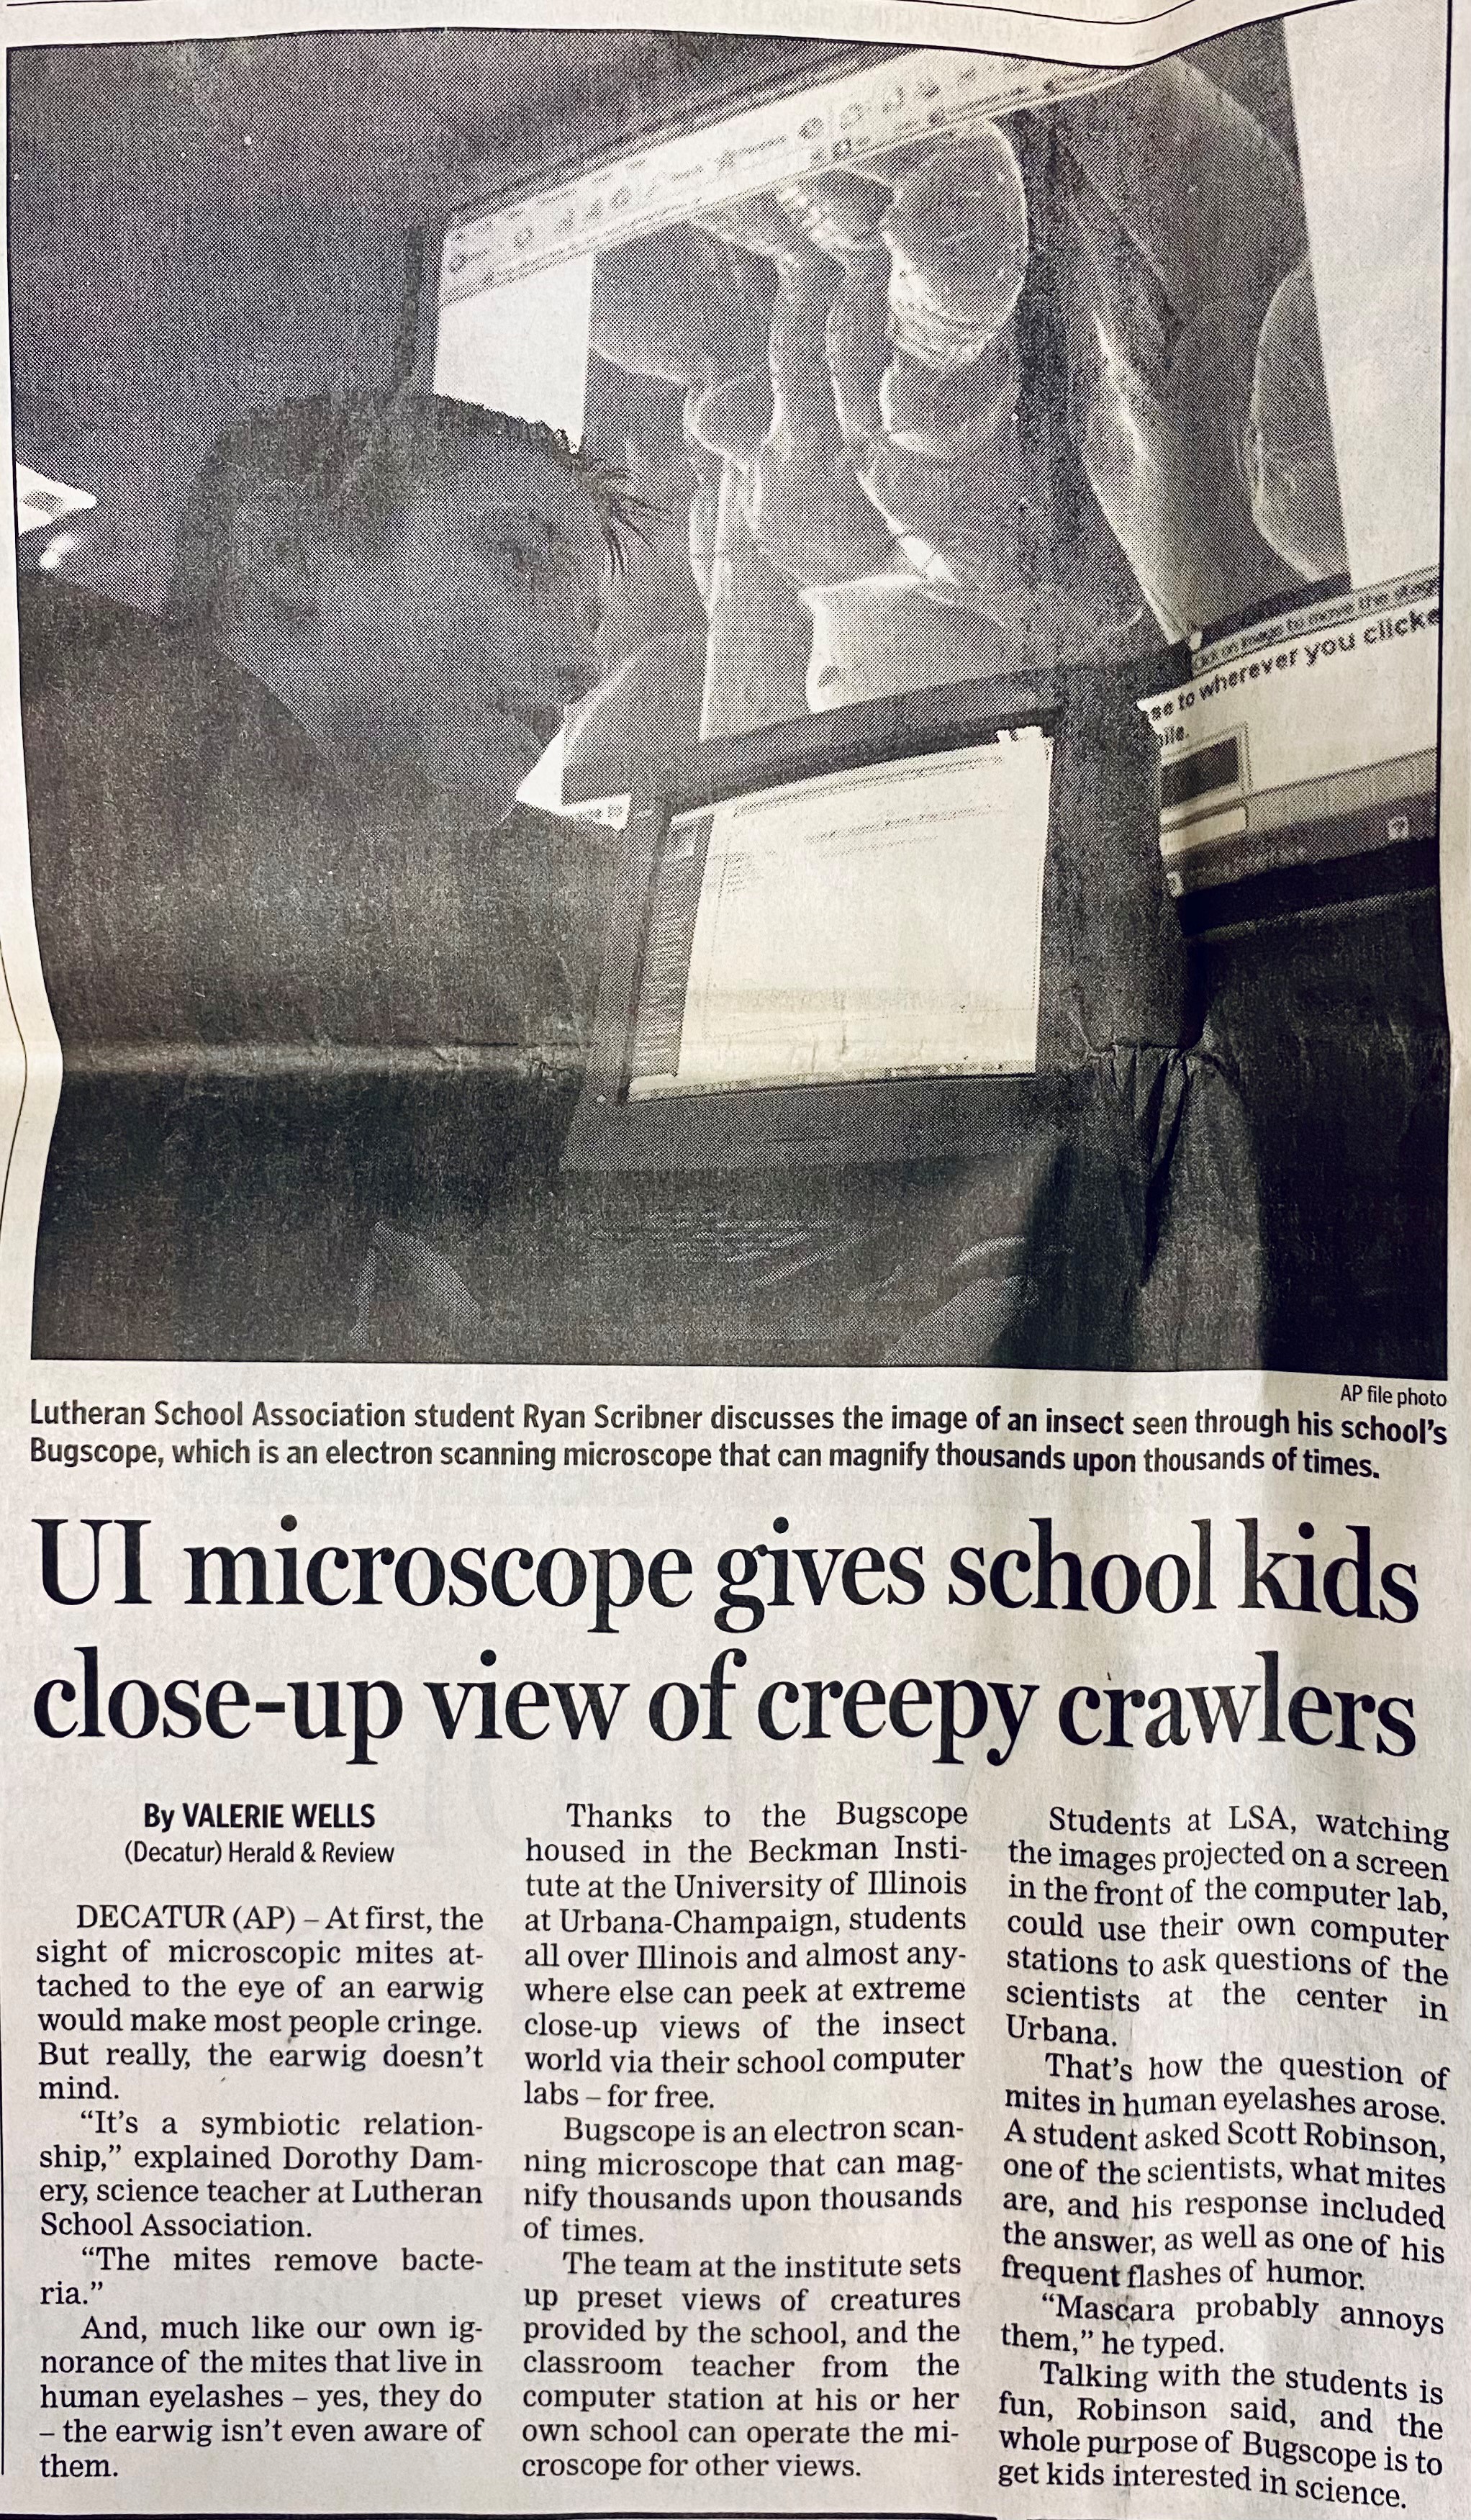 A newspaper clipping with the headline "UI microscope gives school kids close-up view of creepy crawlers" advertises a Bugscope session.